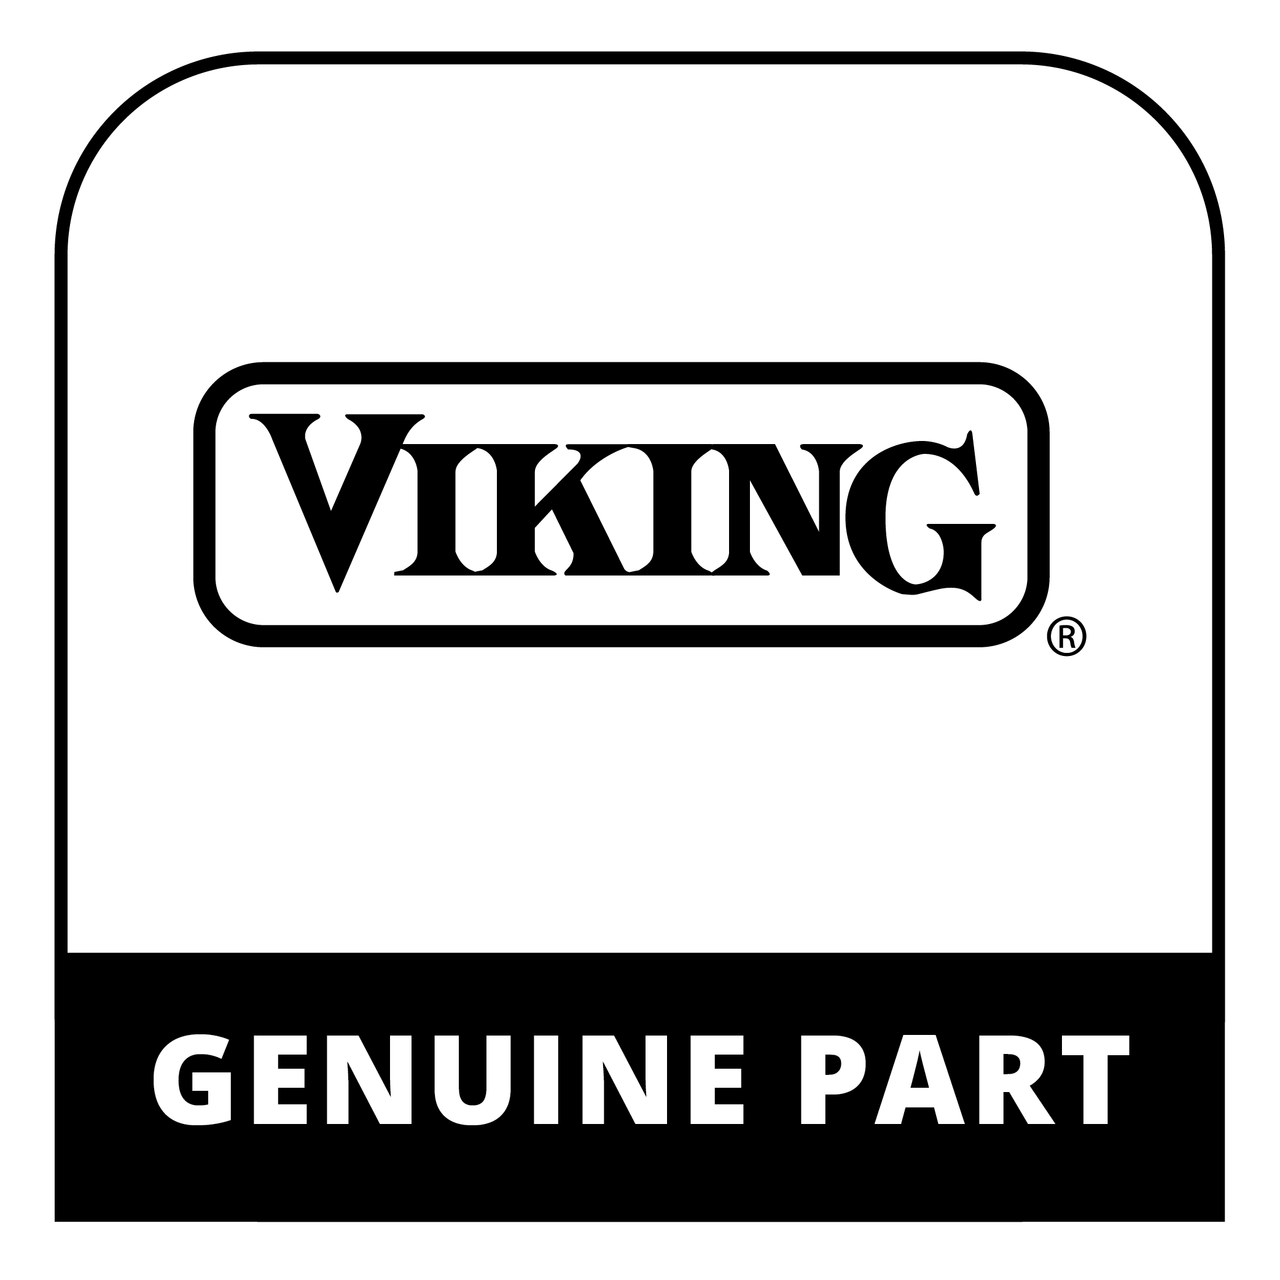 Viking C90012803SE - INLET GRILL DBL LOWER OVEN 27" - Genuine Viking Part